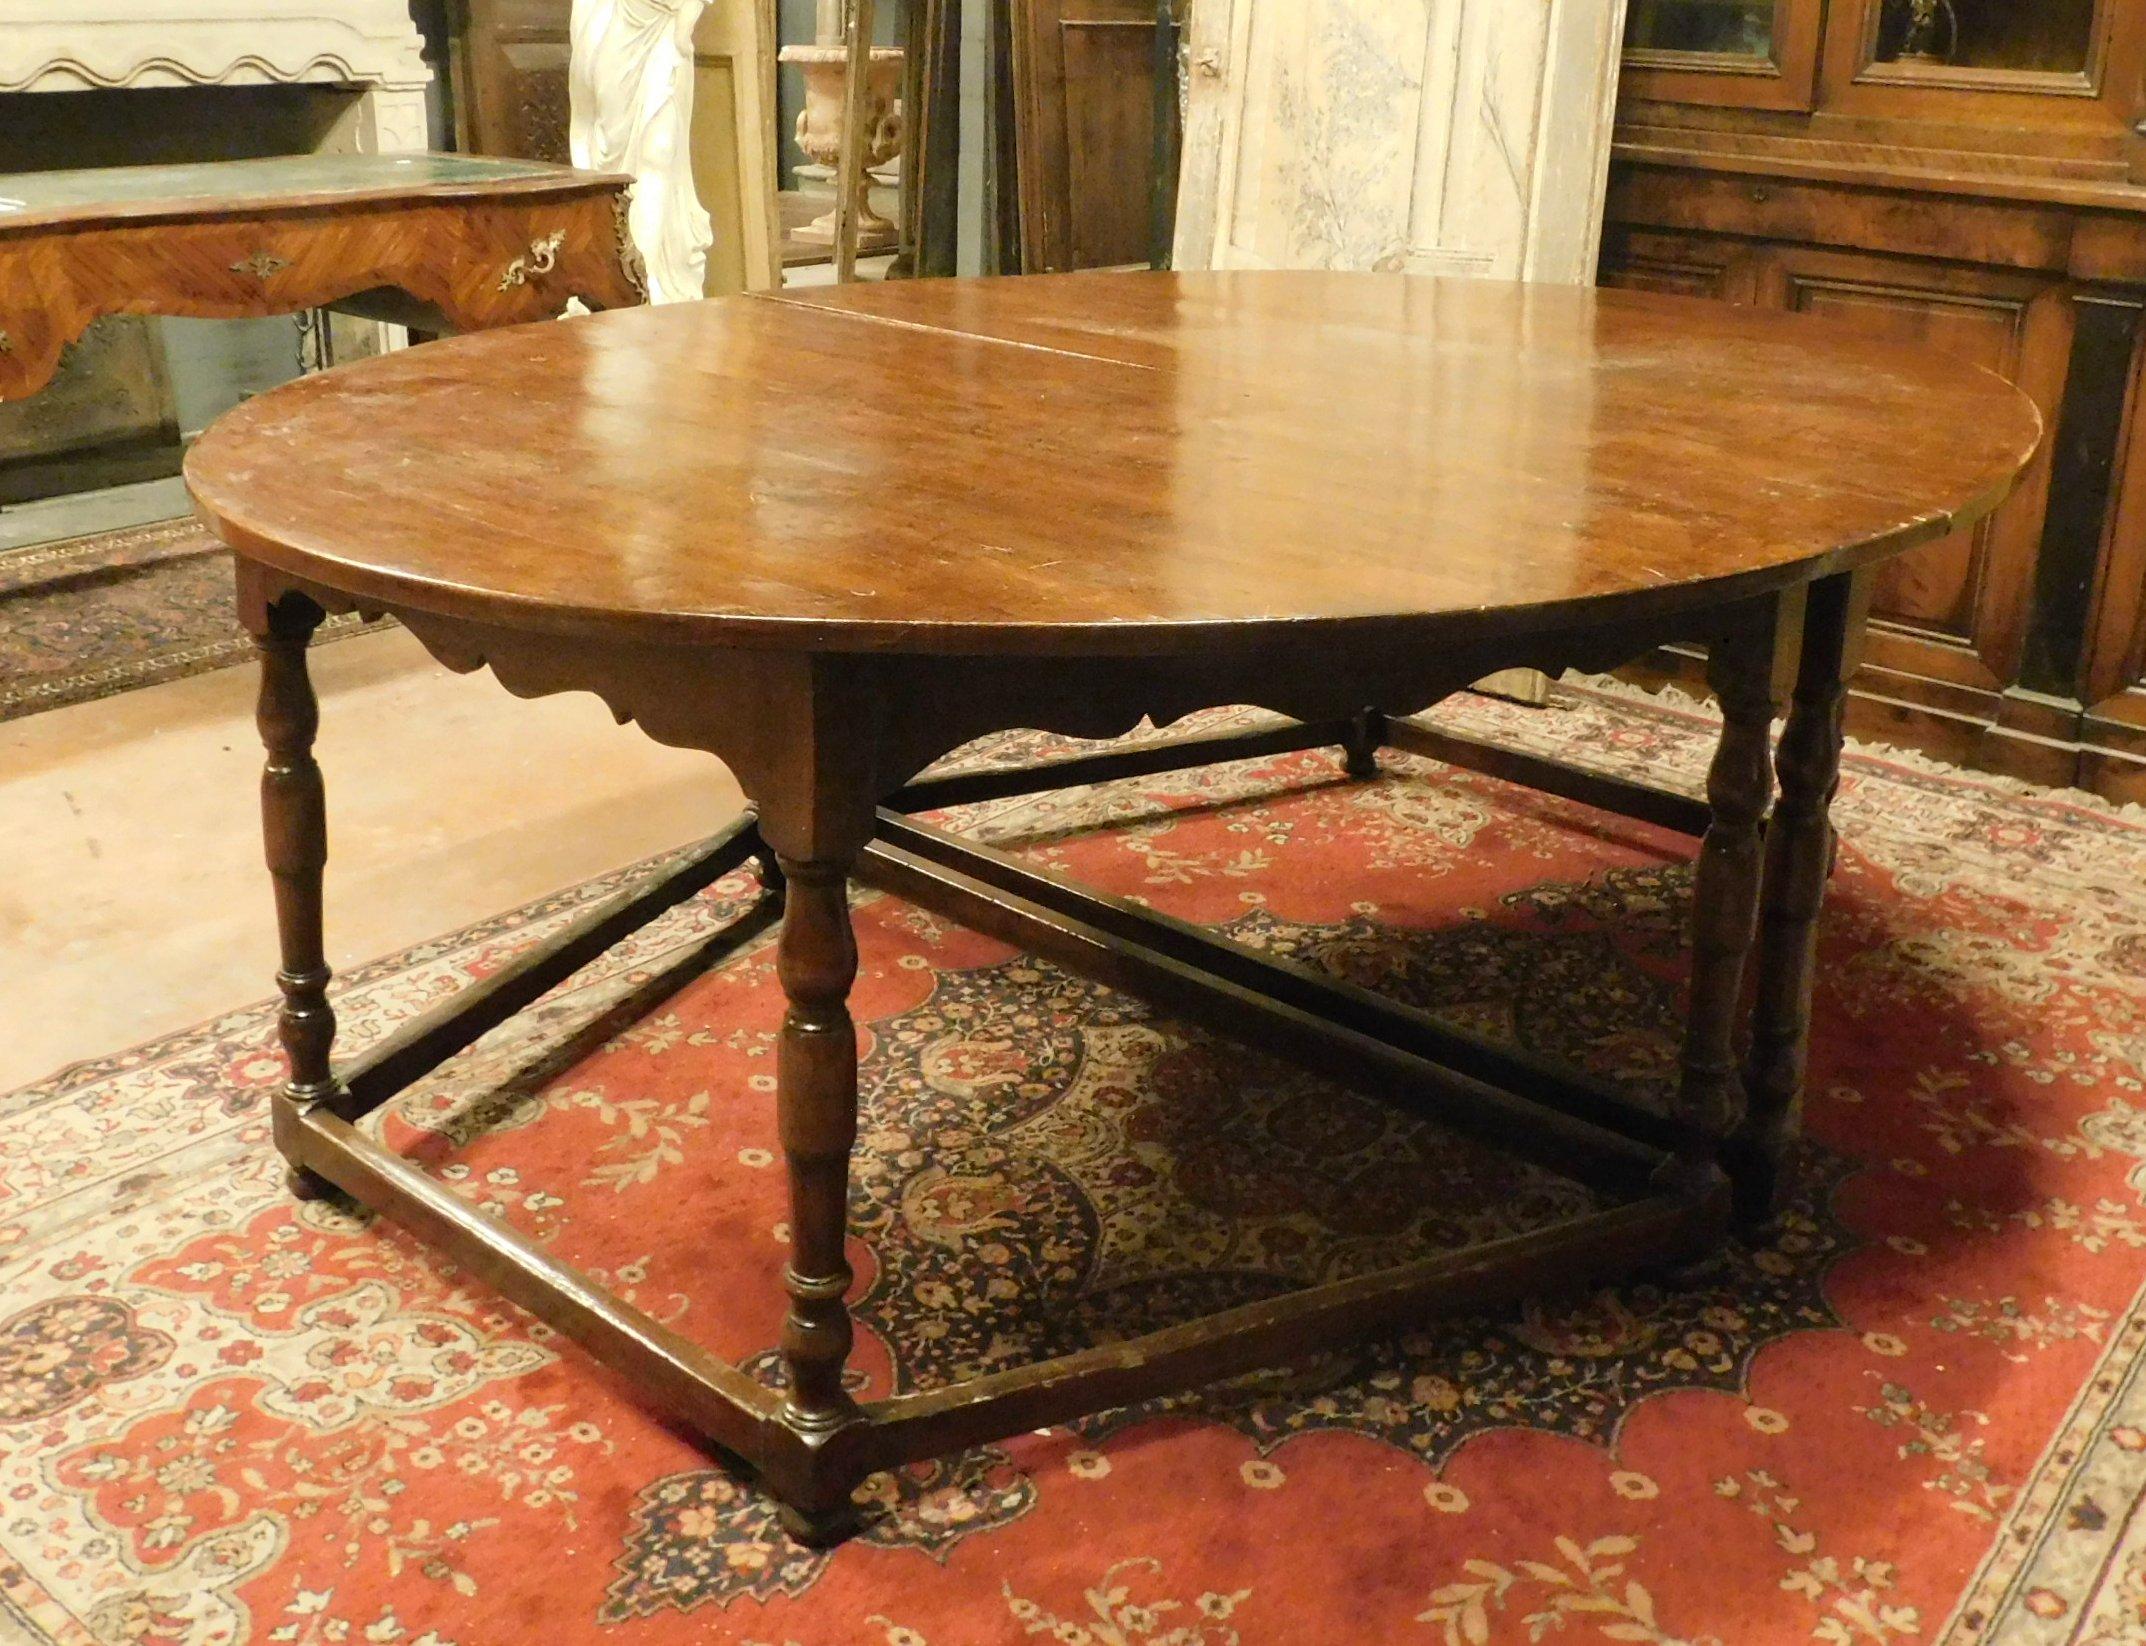 18th Century and Earlier Antique Oval Table in Beechwood, Divisible 2 Half-Moons with 8 Legs, 1600, Italy For Sale